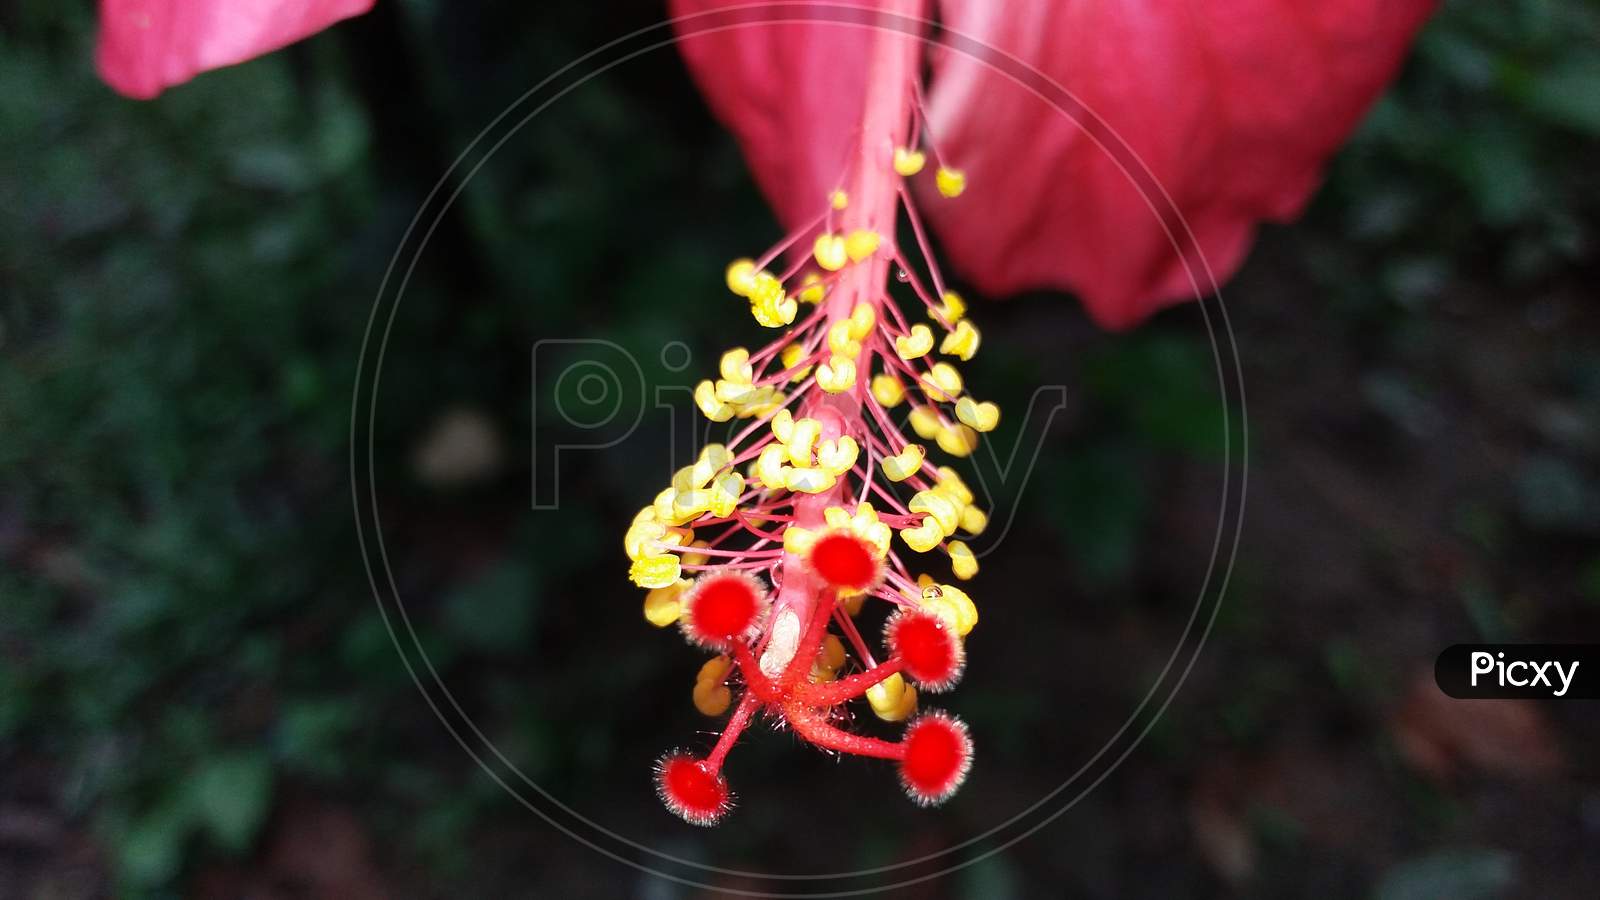 Growth red hibiscus flower in plant